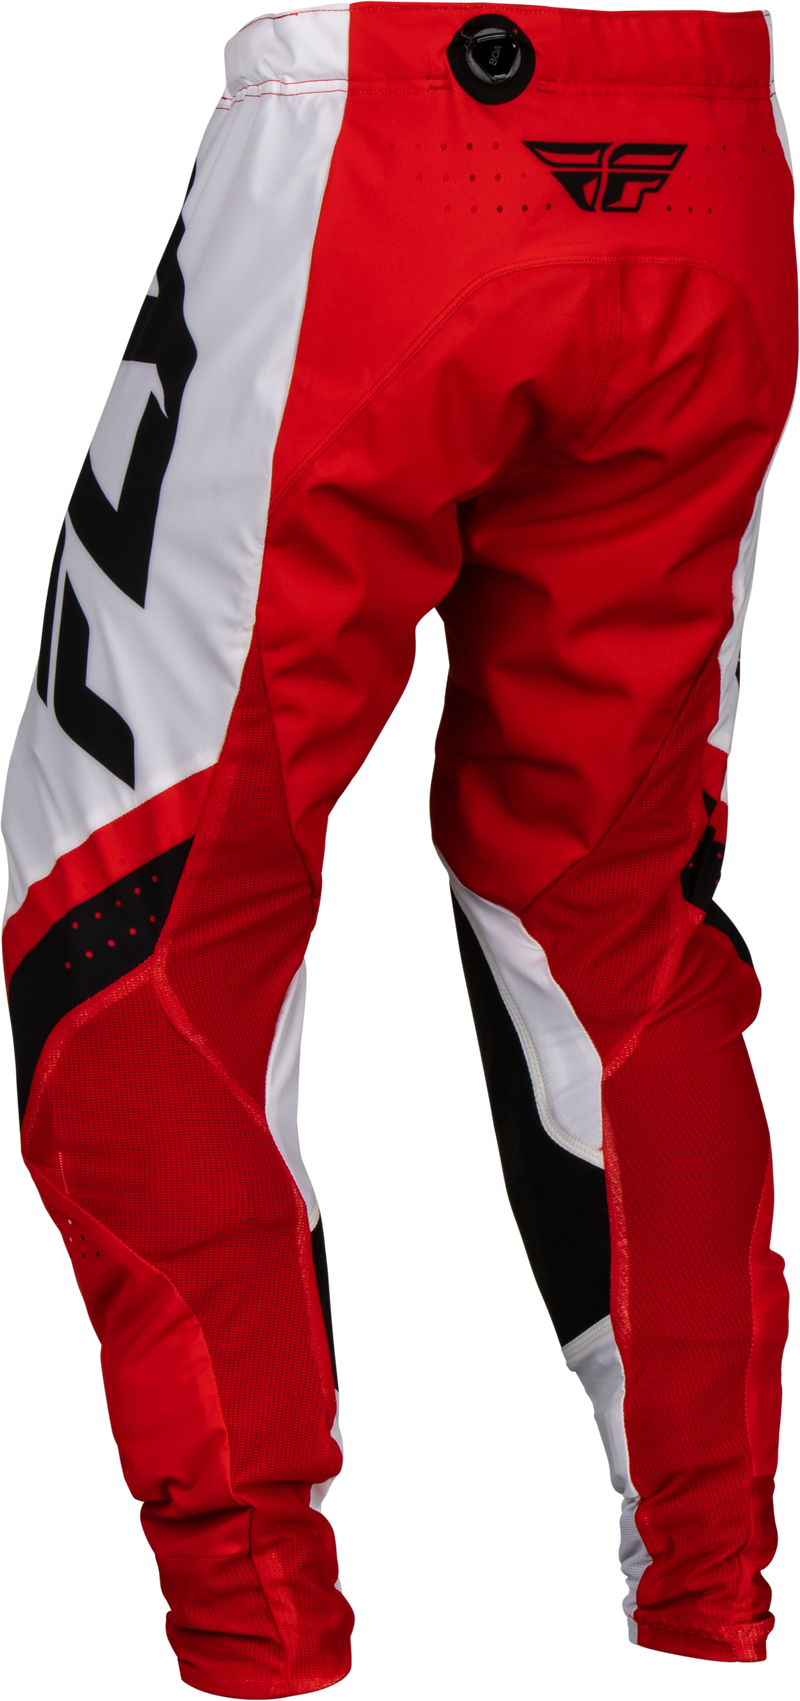 FLY Racing Lite Adult Moto Gear Set - Pant and Jersey Combo